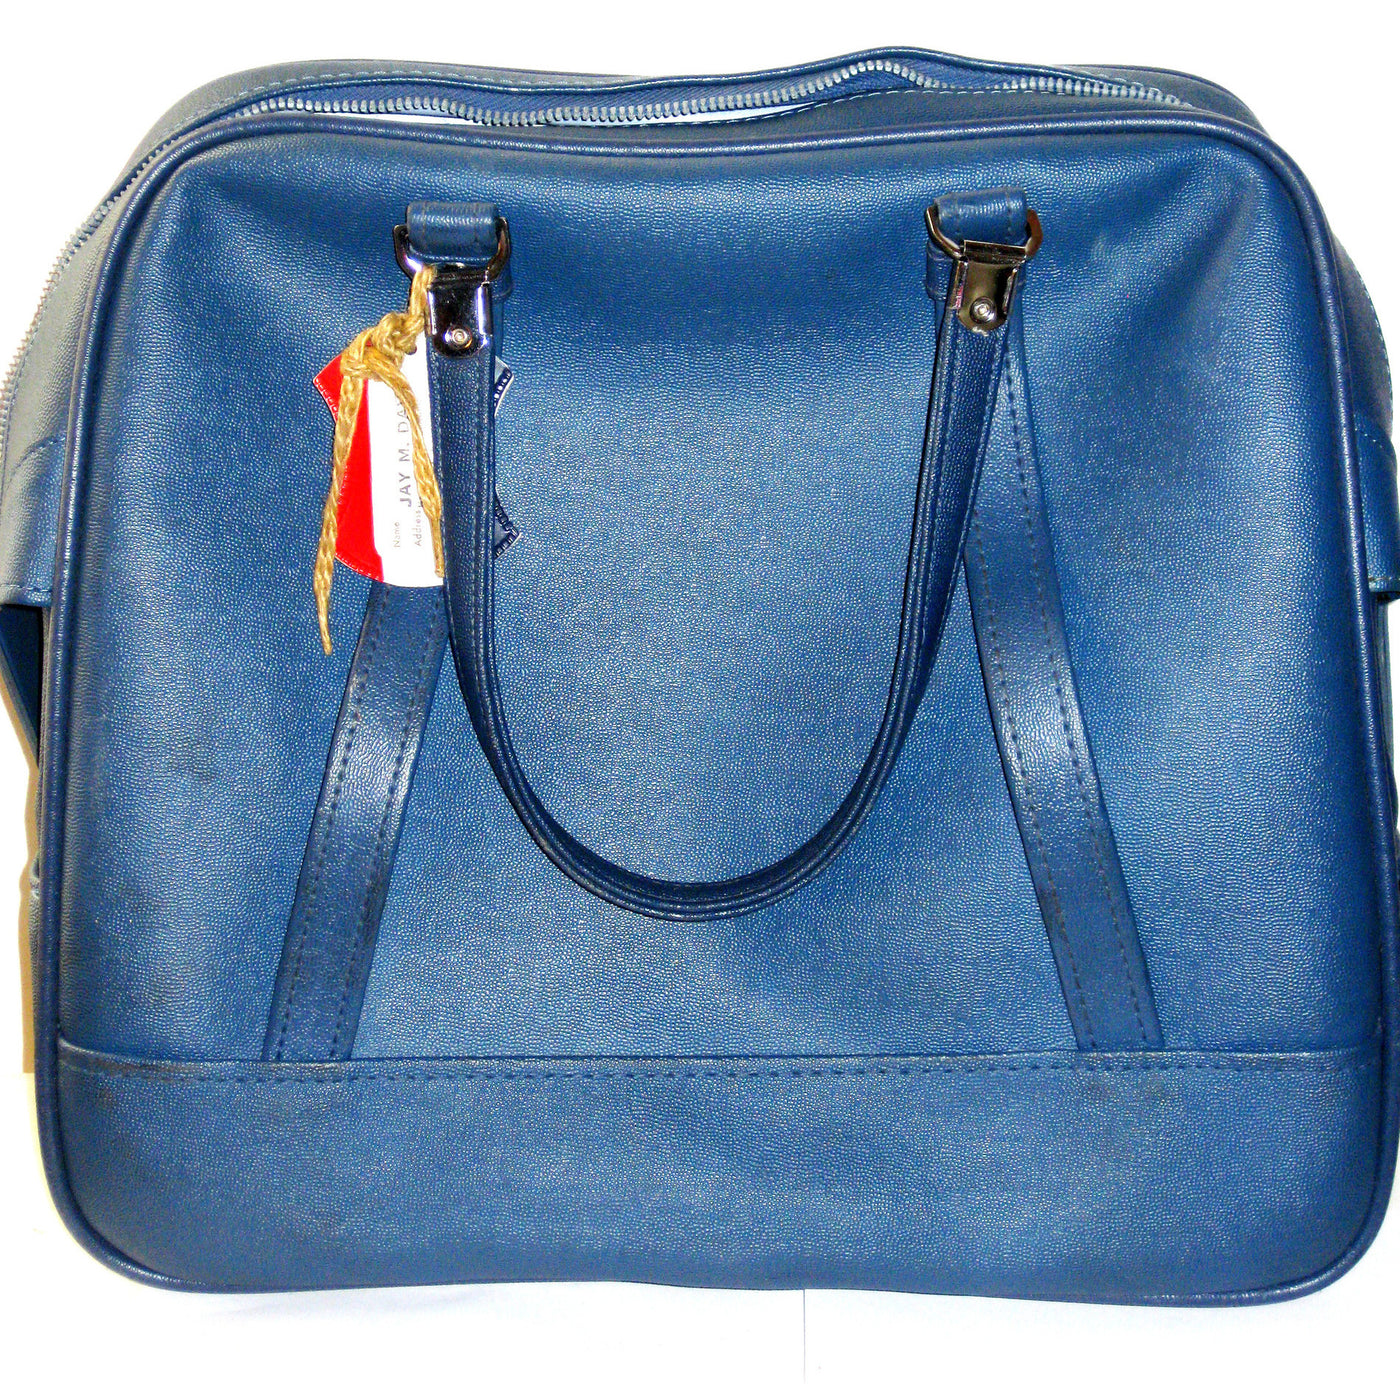 Vintage Blue Travelbag By American Tourister 